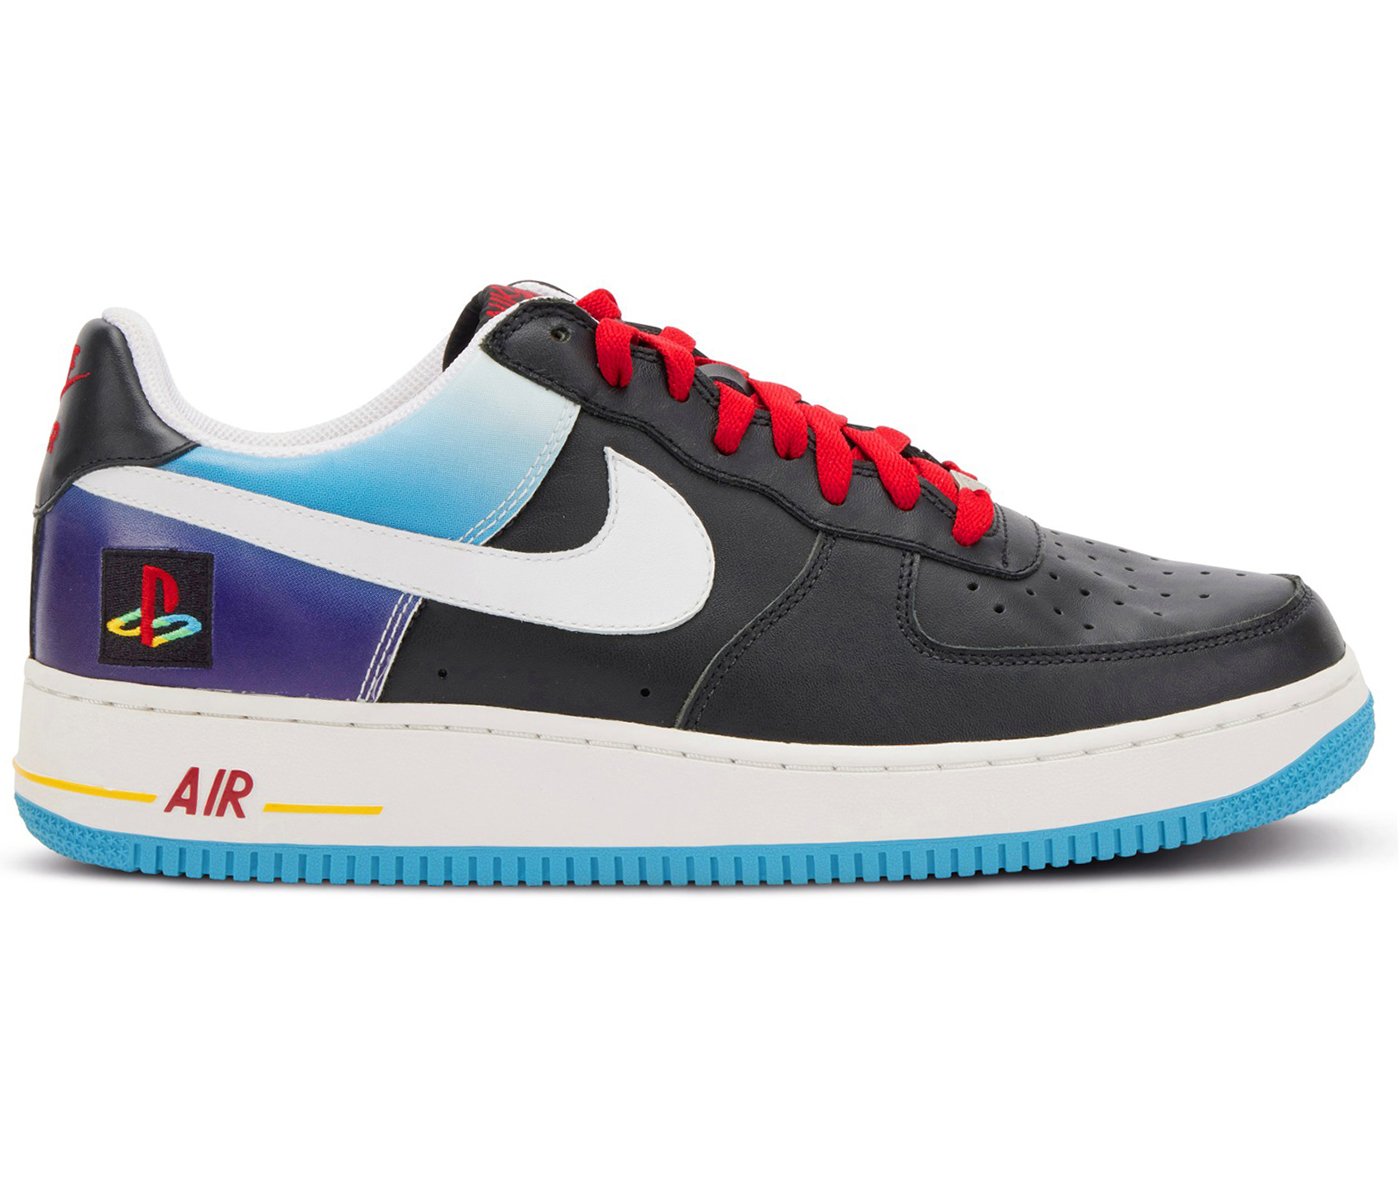 Nike Air Force 1 Low Playstation Leather Sample (2006) sneaker informations